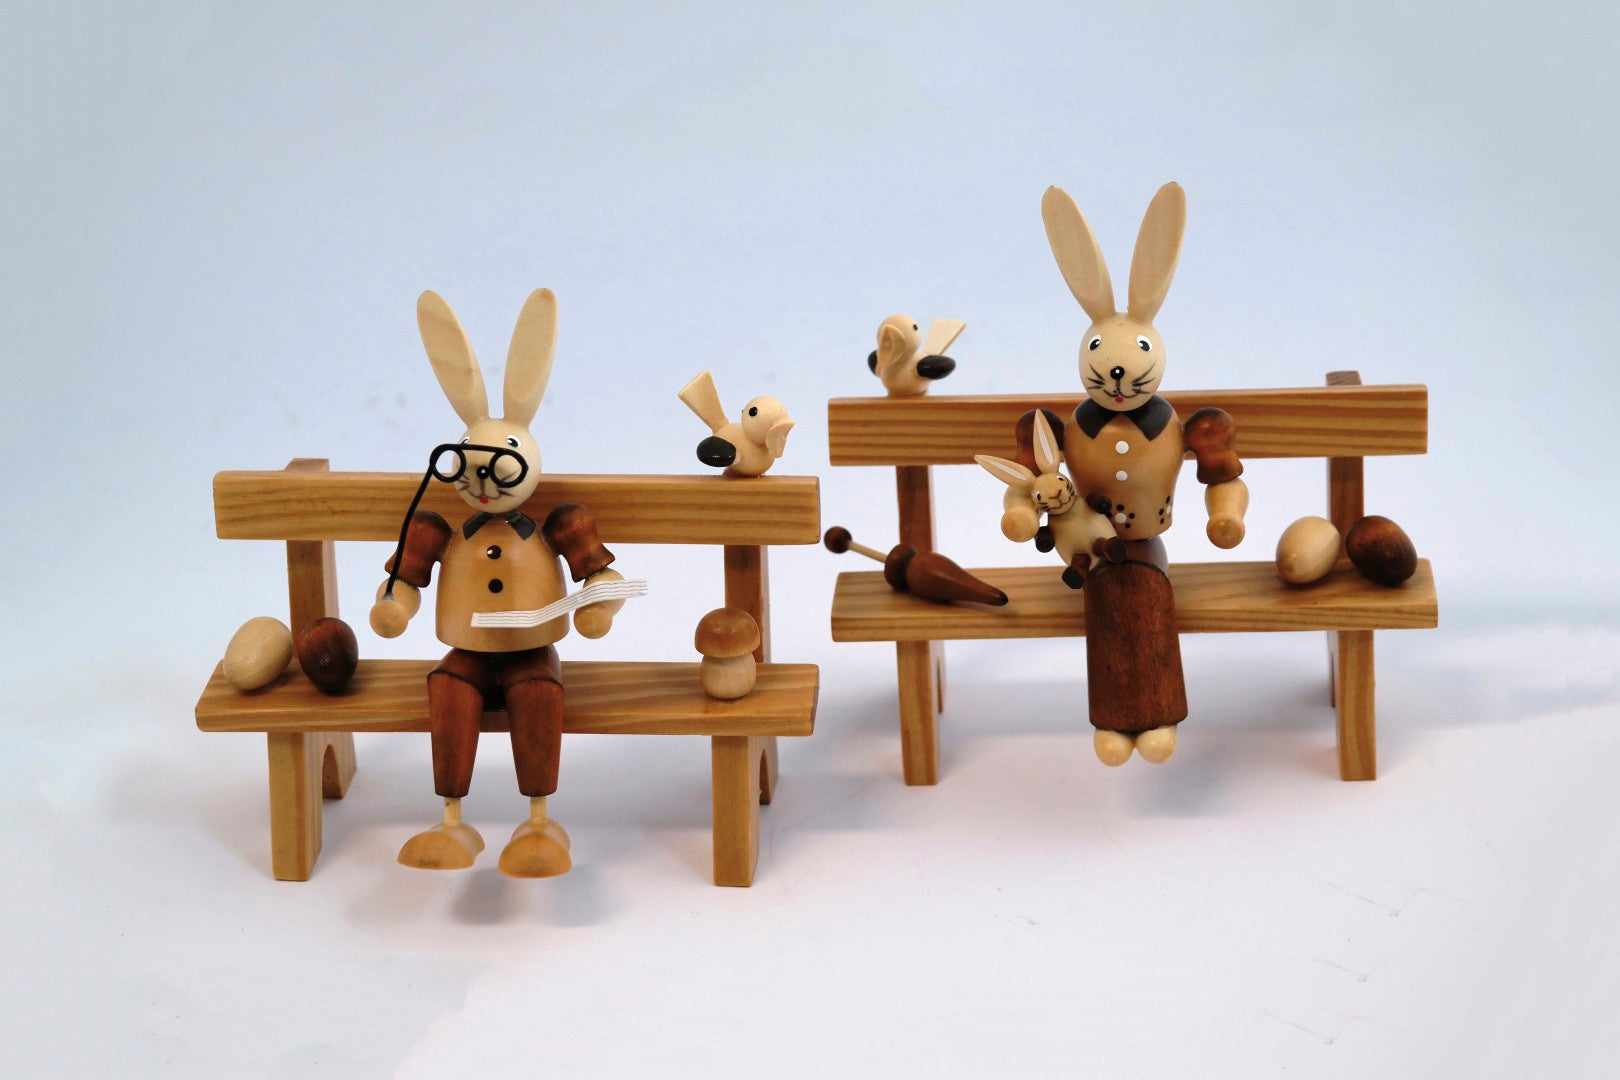 Pair of rabbits on bench